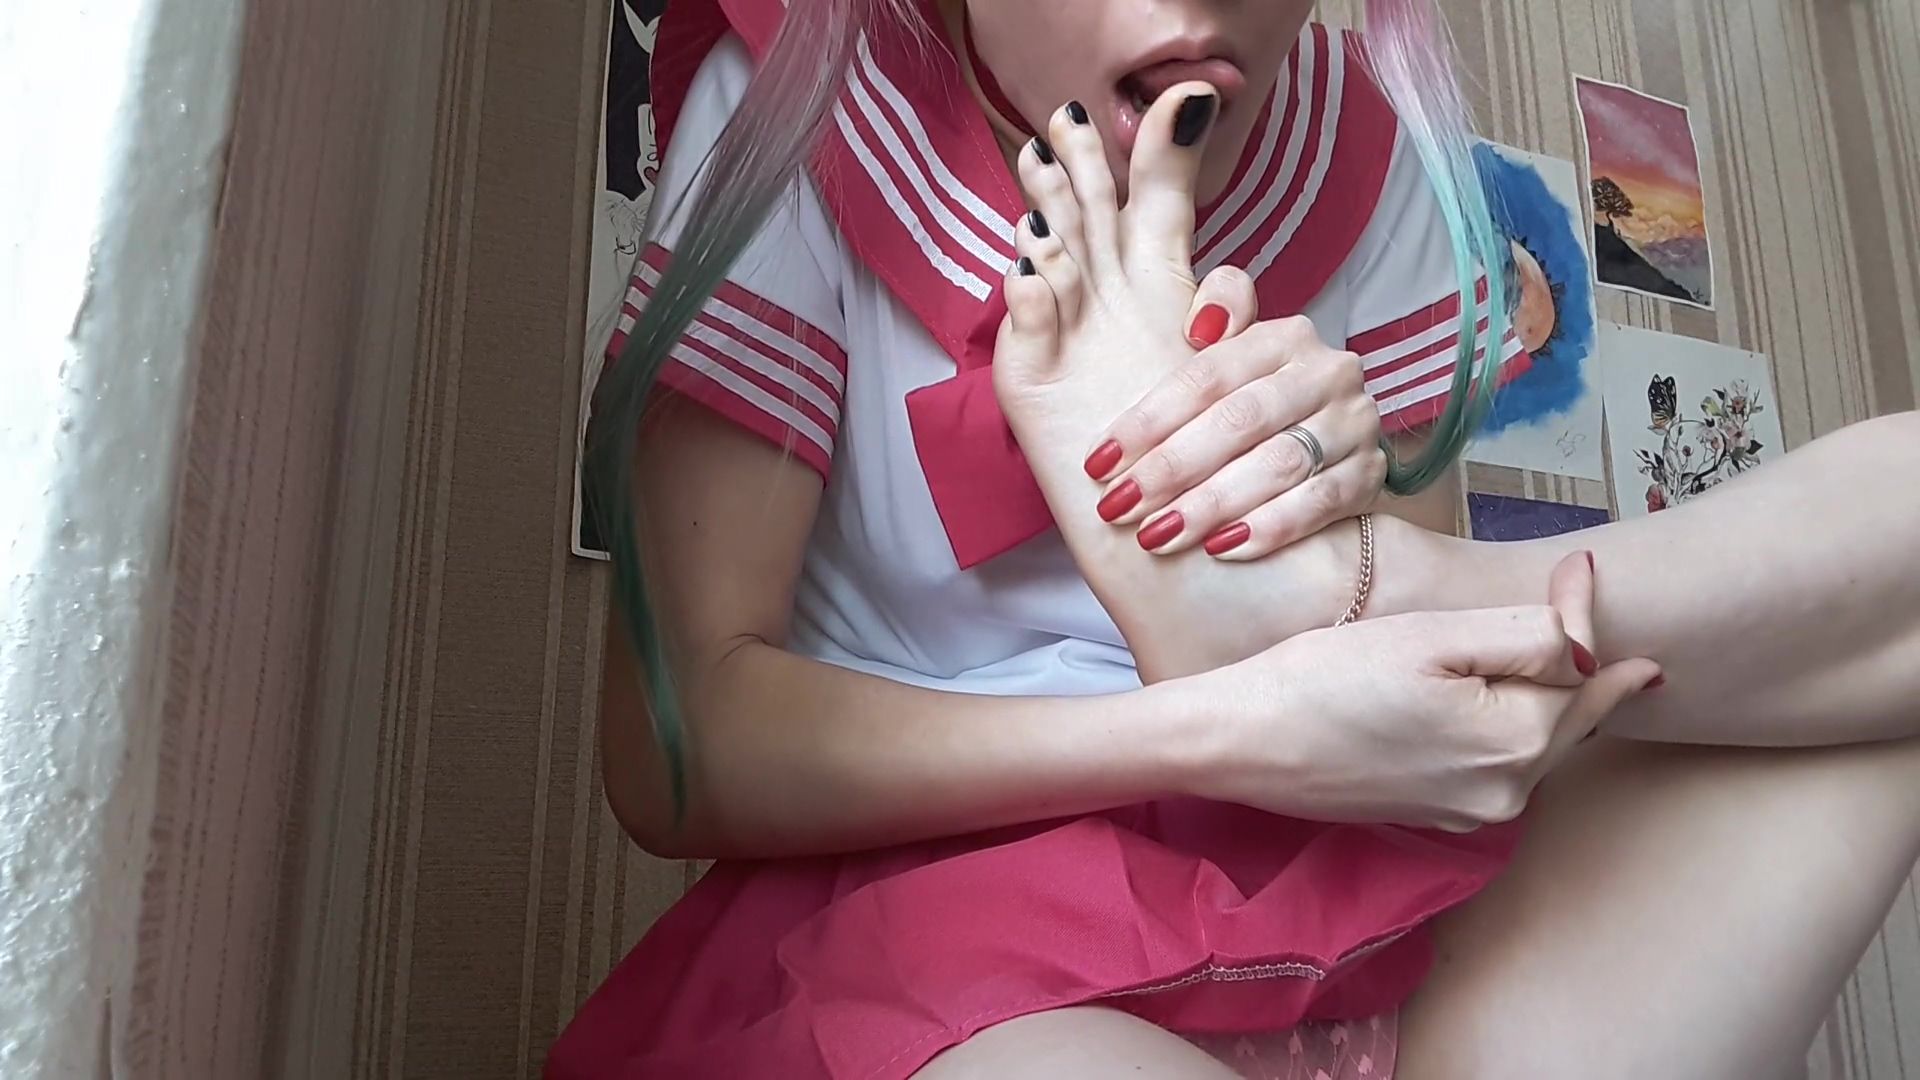 Chunky Naughty Schoolgirl Flashes Her Small Breasts And Sucks Toes With Black Nail Polish Ride